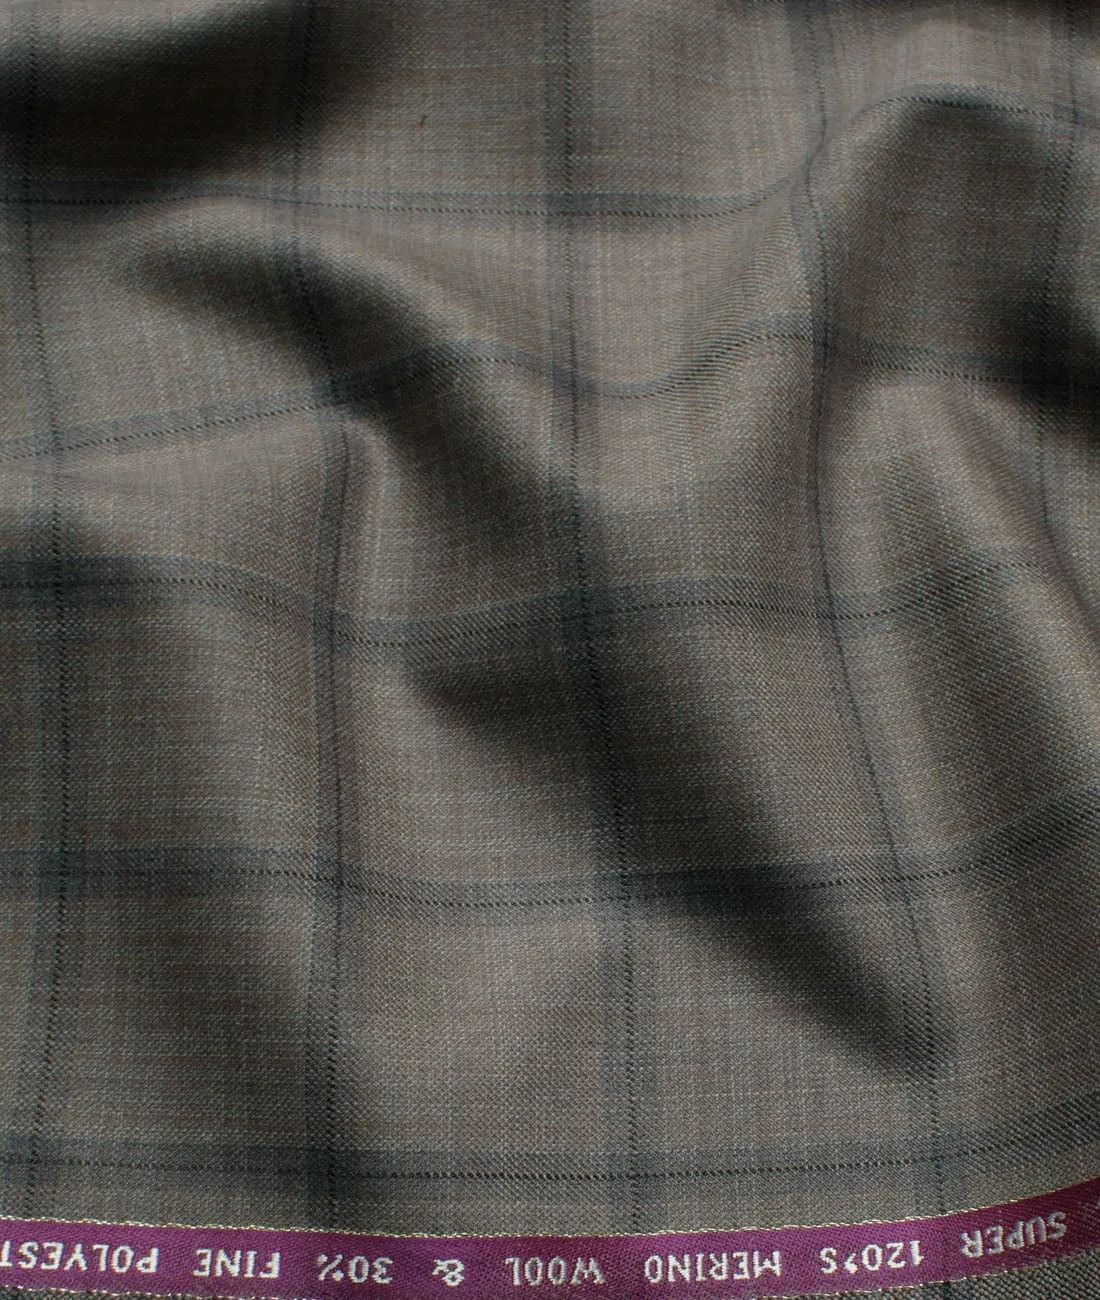 Wool Checks Super 120GÇÖs Unstitched Suiting Fabric (Light Brown) Very Fine & Soft, Light brown base with Grey and black checks